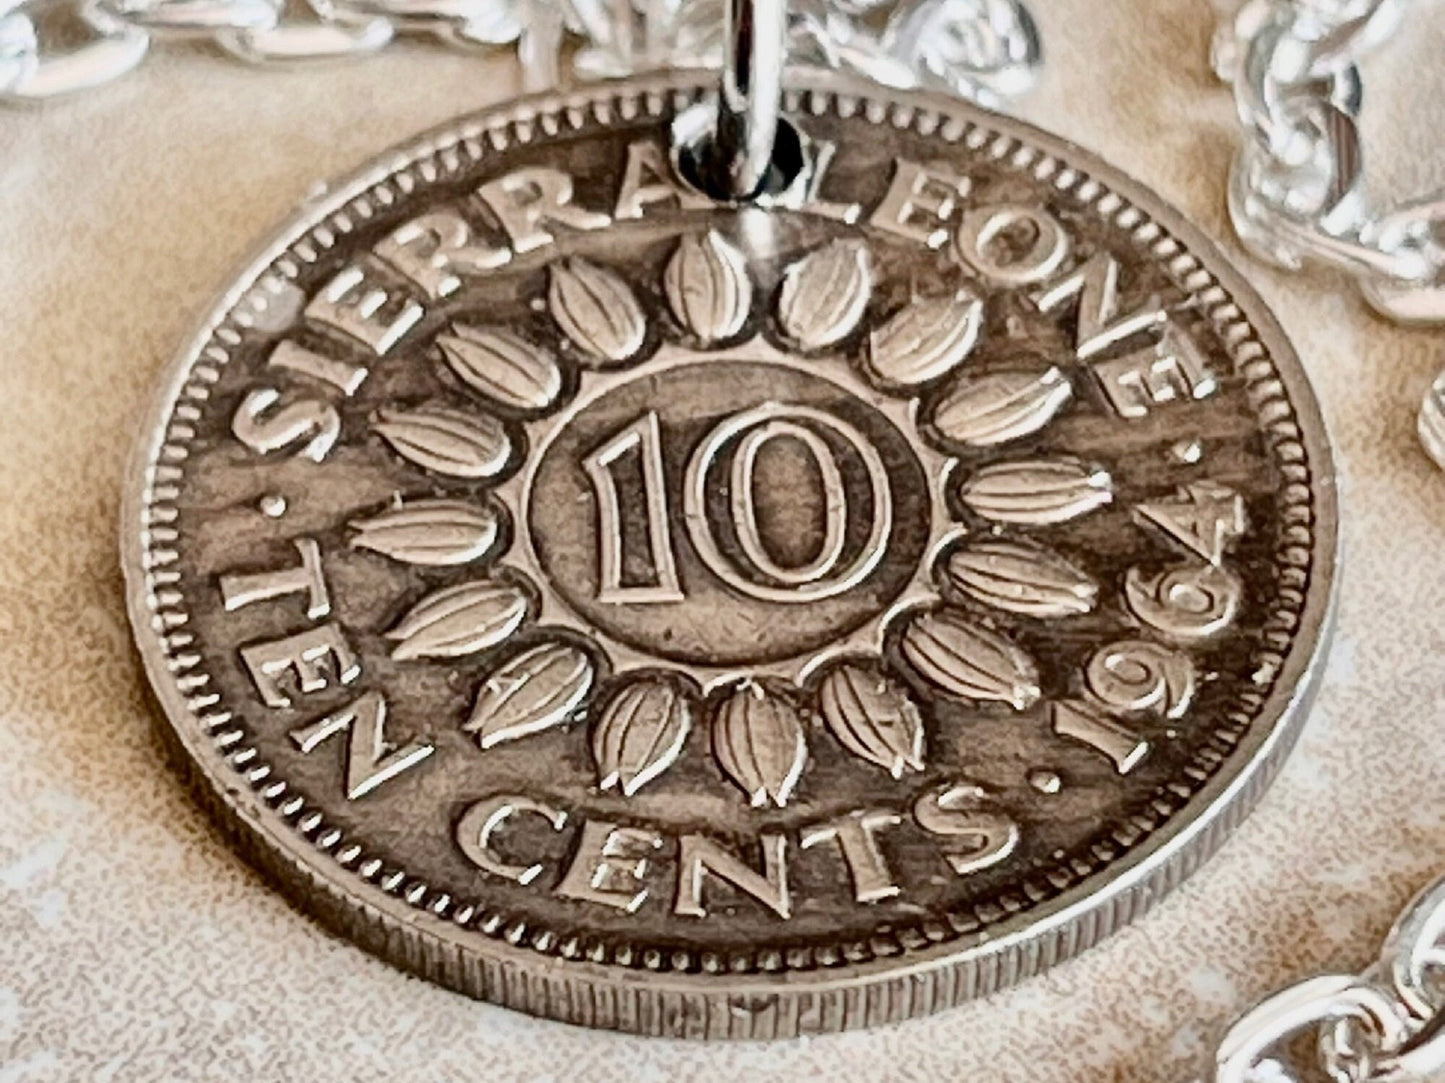 Sierra Leone Coin Pendant African 10 Cents Personal Necklace Vintage Handmade Jewelry Gift Friend Charm For Him Her World Coin Collector